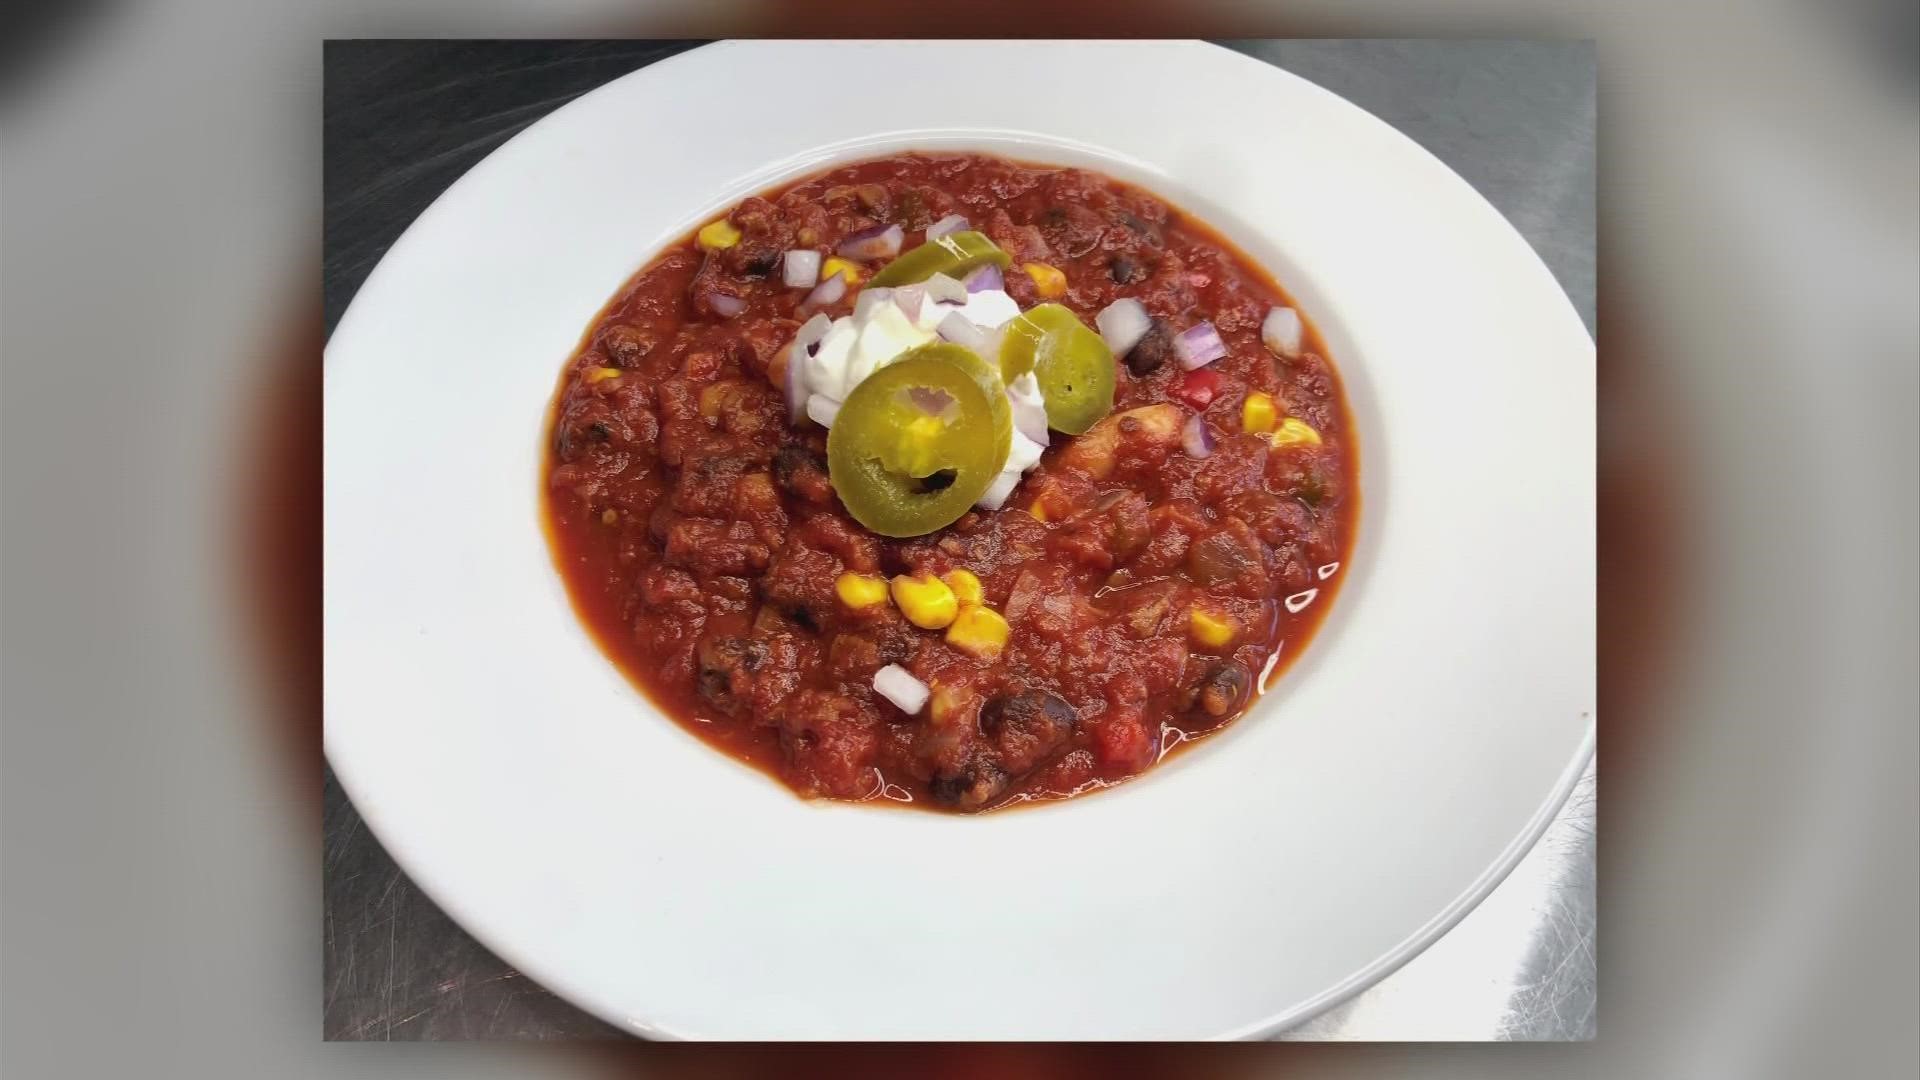 10TV's Brittany Bailey serves up the perfect dish for International Hot and Spicy Day.